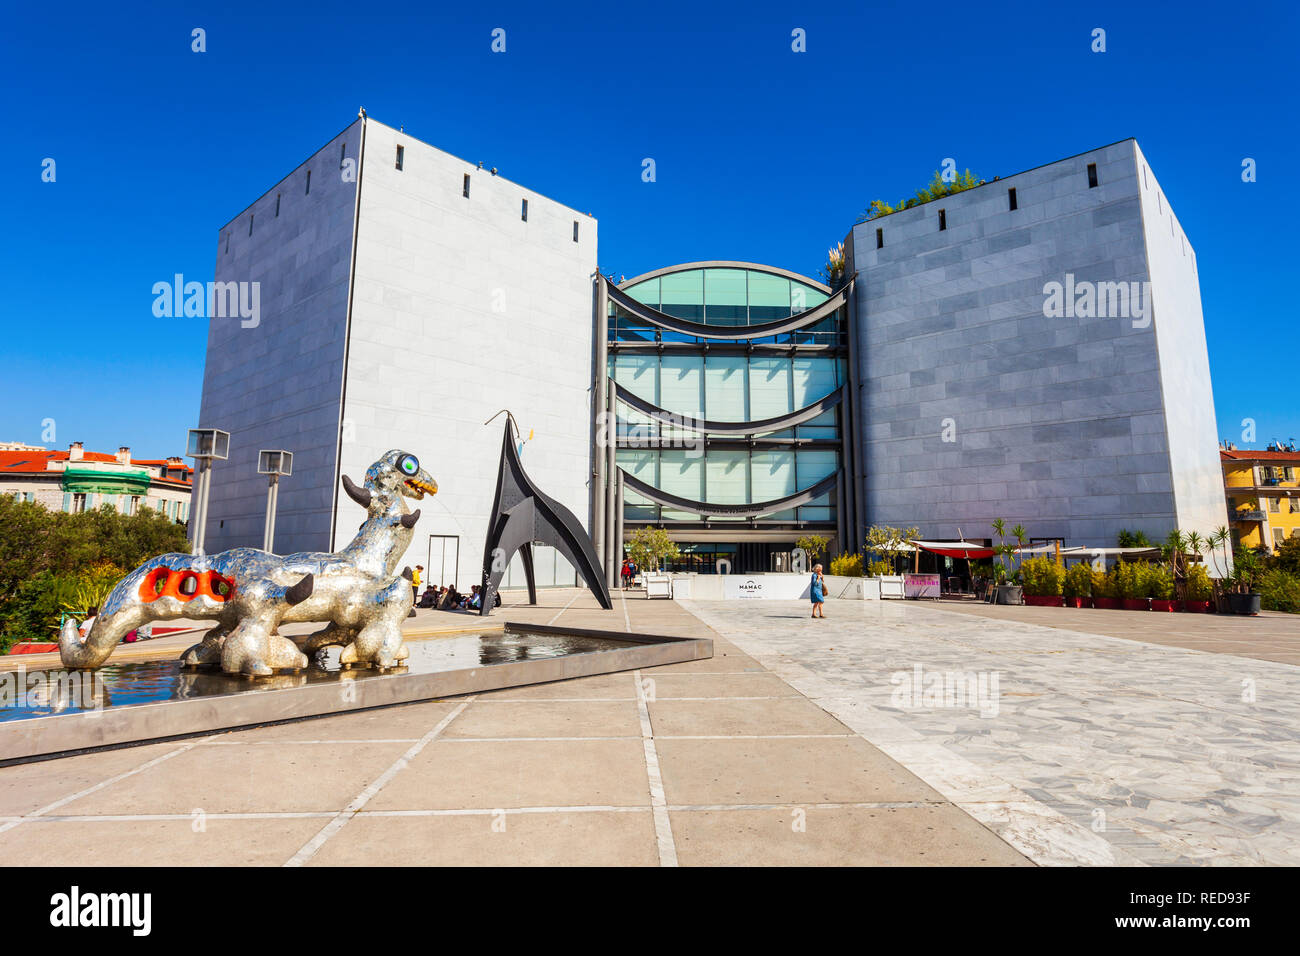 NICE, FRANCE - SEPTEMBER 27, 2018: Museum of Modern and Contemporary Art or MAMAC in Nice city, France Stock Photo